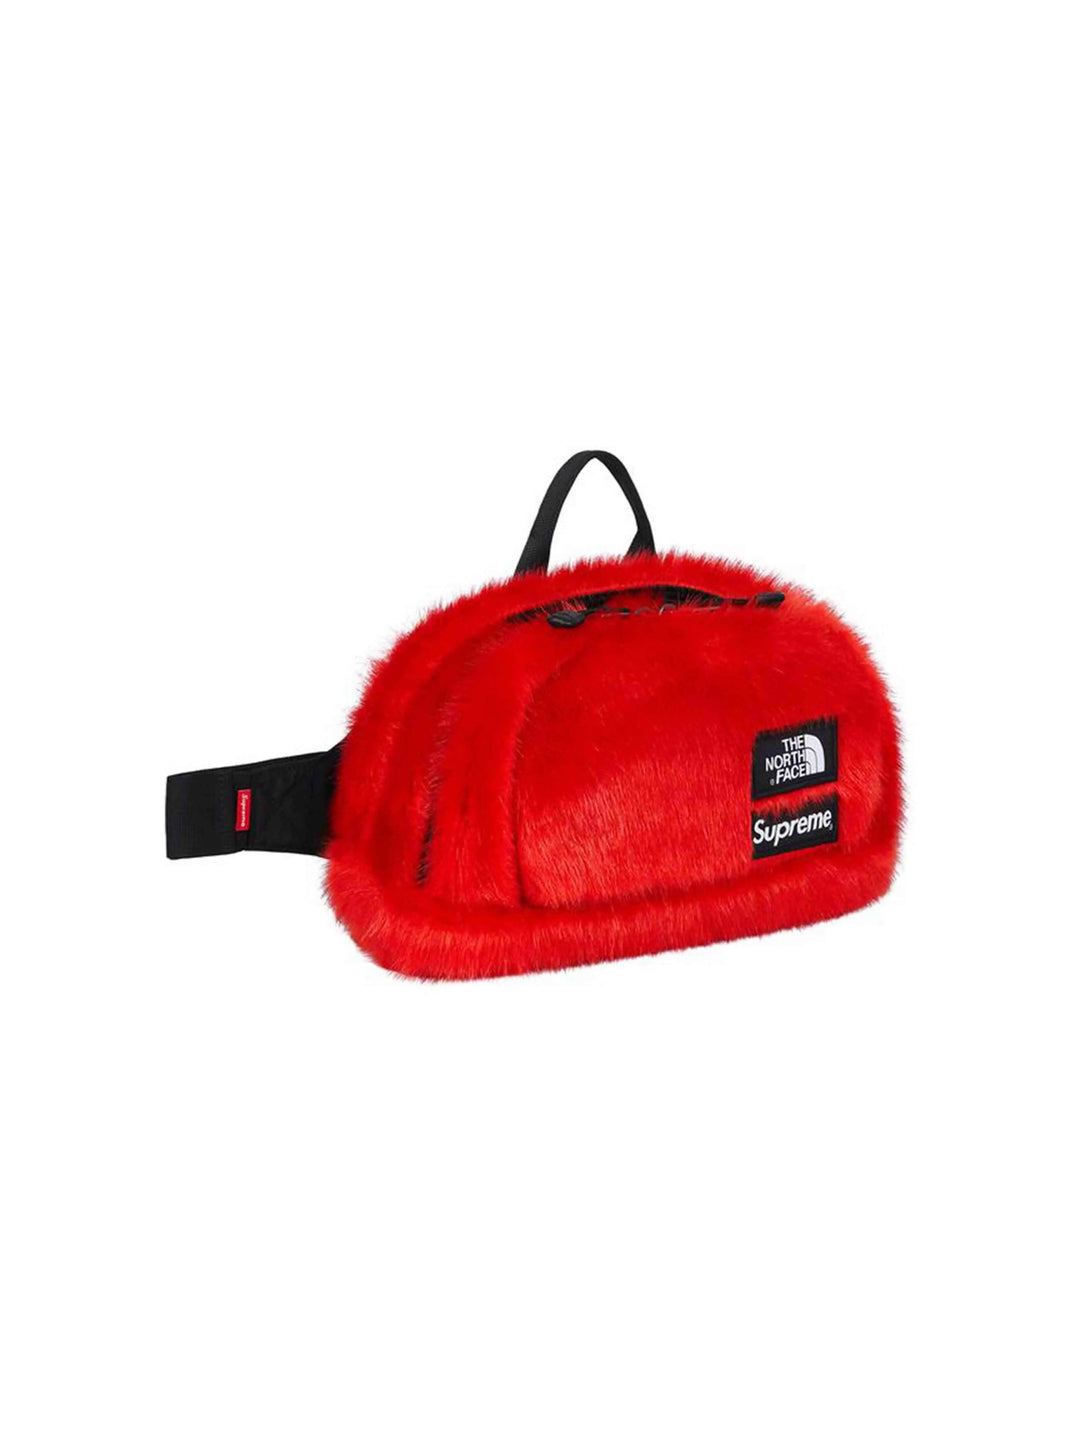 Supreme X The North Face Faux Fur Waist Bag Red [FW20] Prior